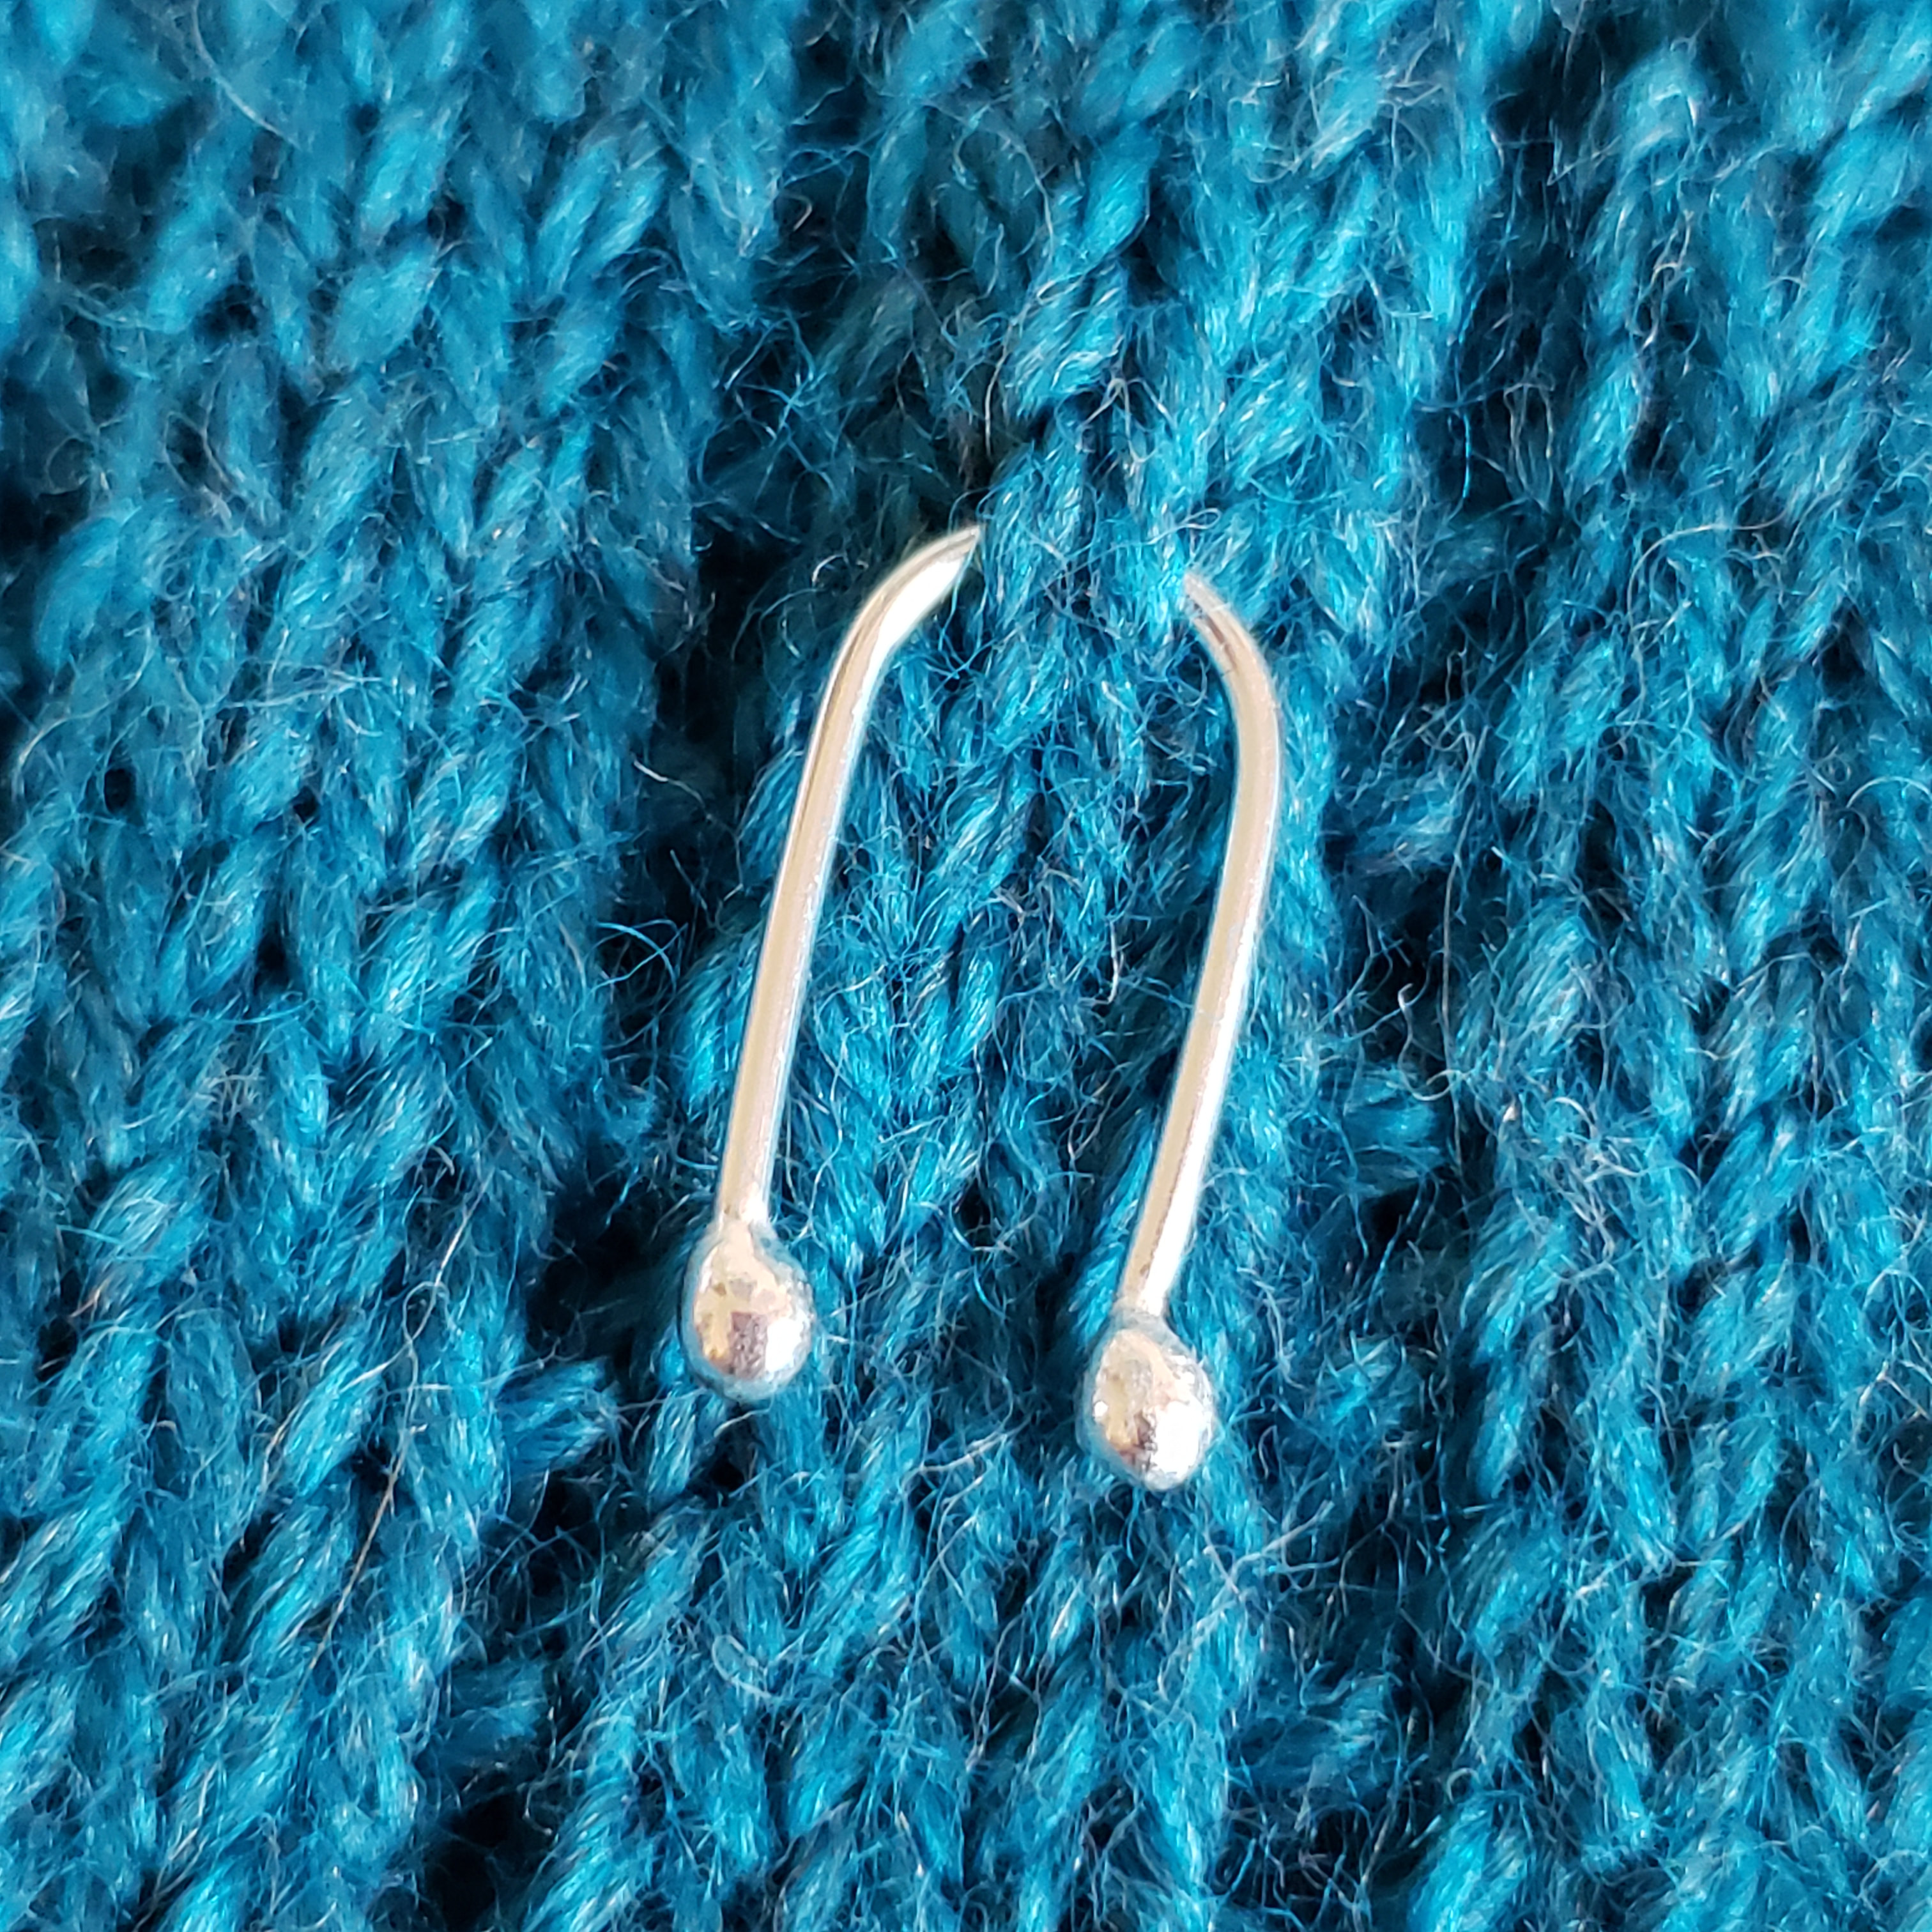 Sterling silver stitch markers for knitting and crochet, small cable  needles now in 2 sizes